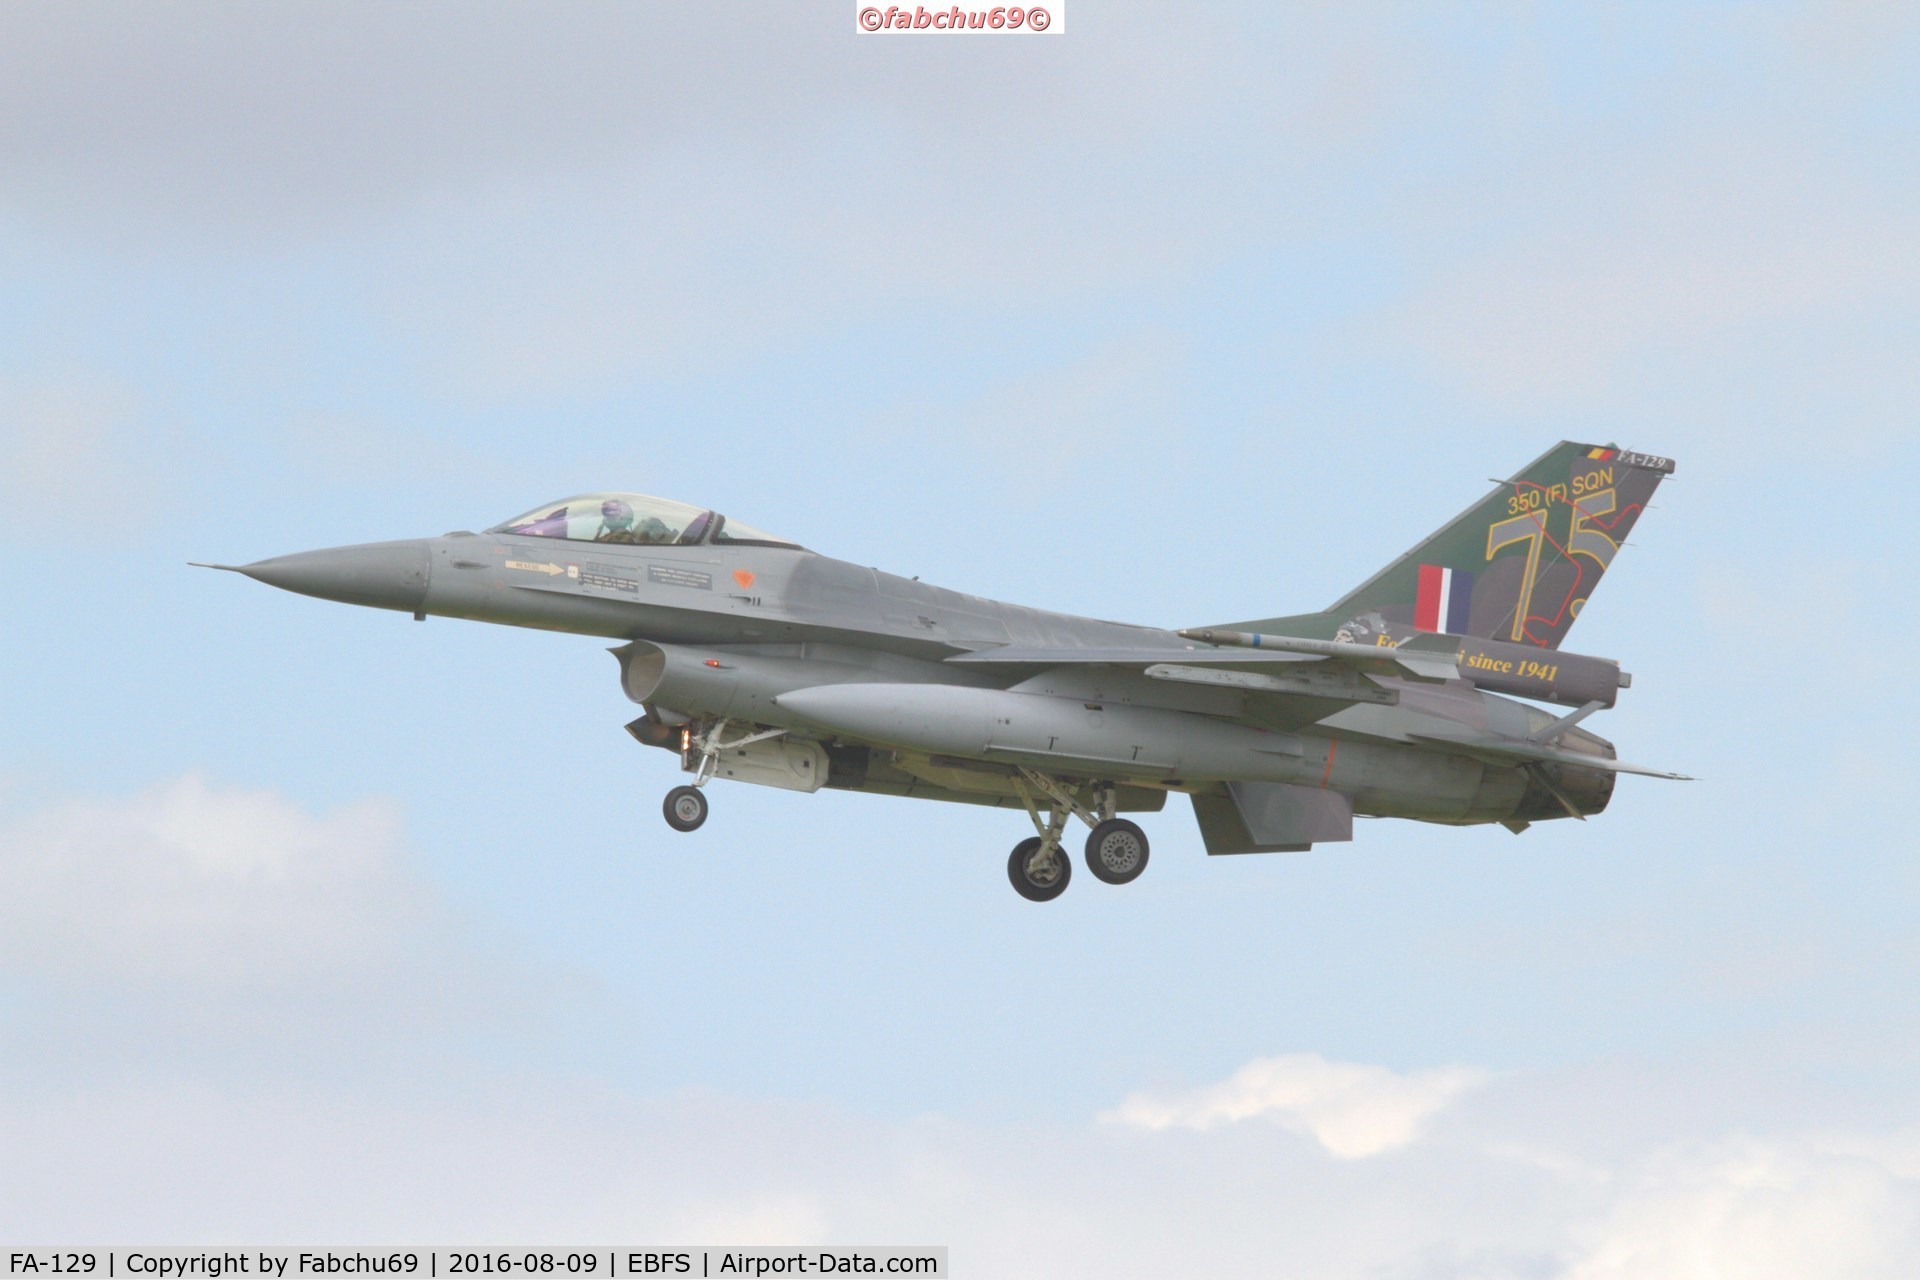 FA-129, 1990 SABCA F-16AM Fighting Falcon C/N 6H-129, F16 Belgian Air Force with new tail